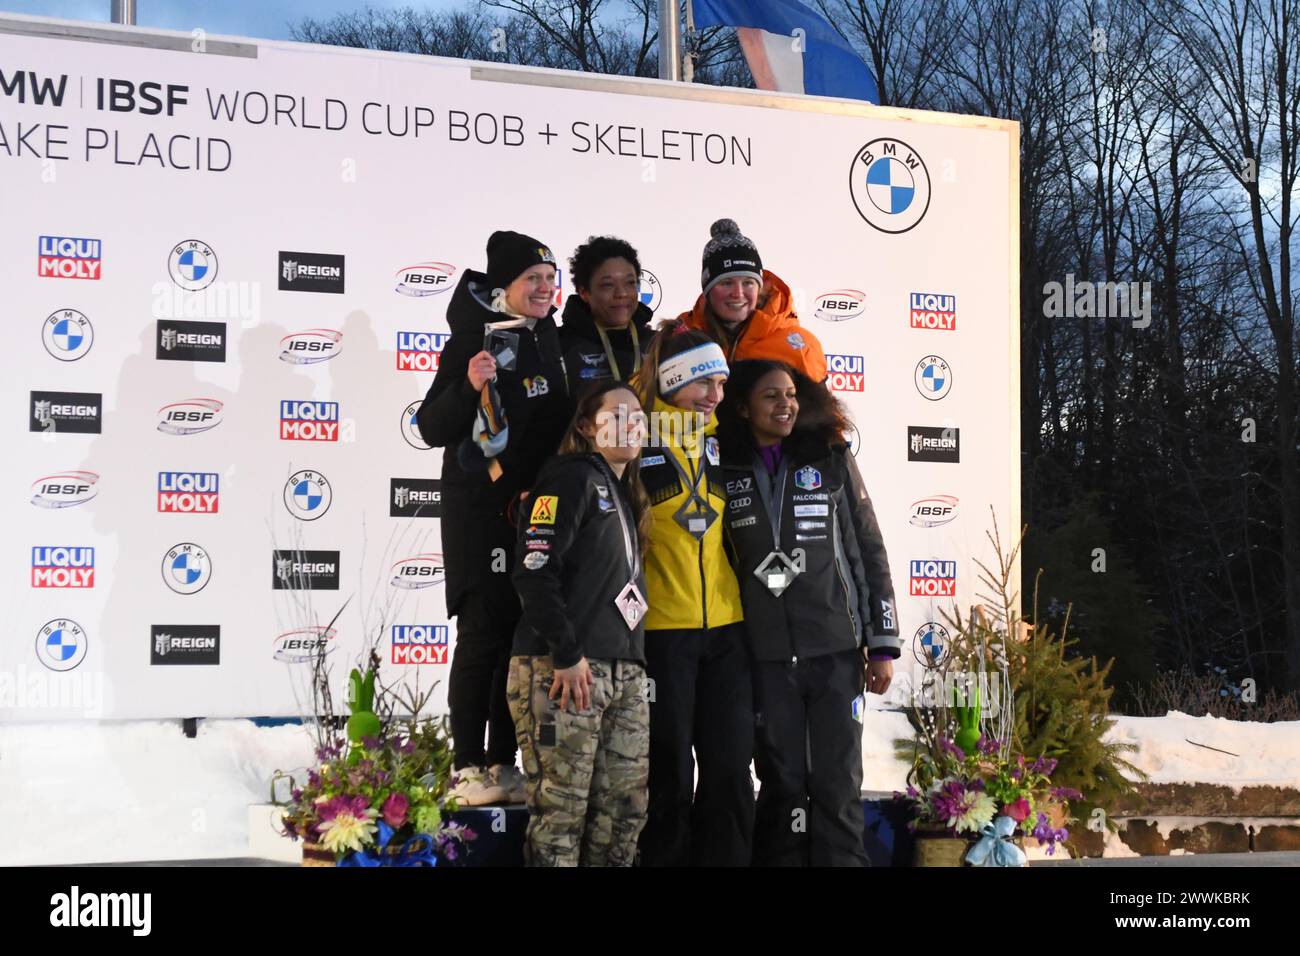 Medalists of the women's skeleton, 2nd place Kimberley Bos, winner Mystique Ro, 3rd place Kimberley Bos, 4th place Katie Uhlaender, 5th place Jacqueli Stock Photo